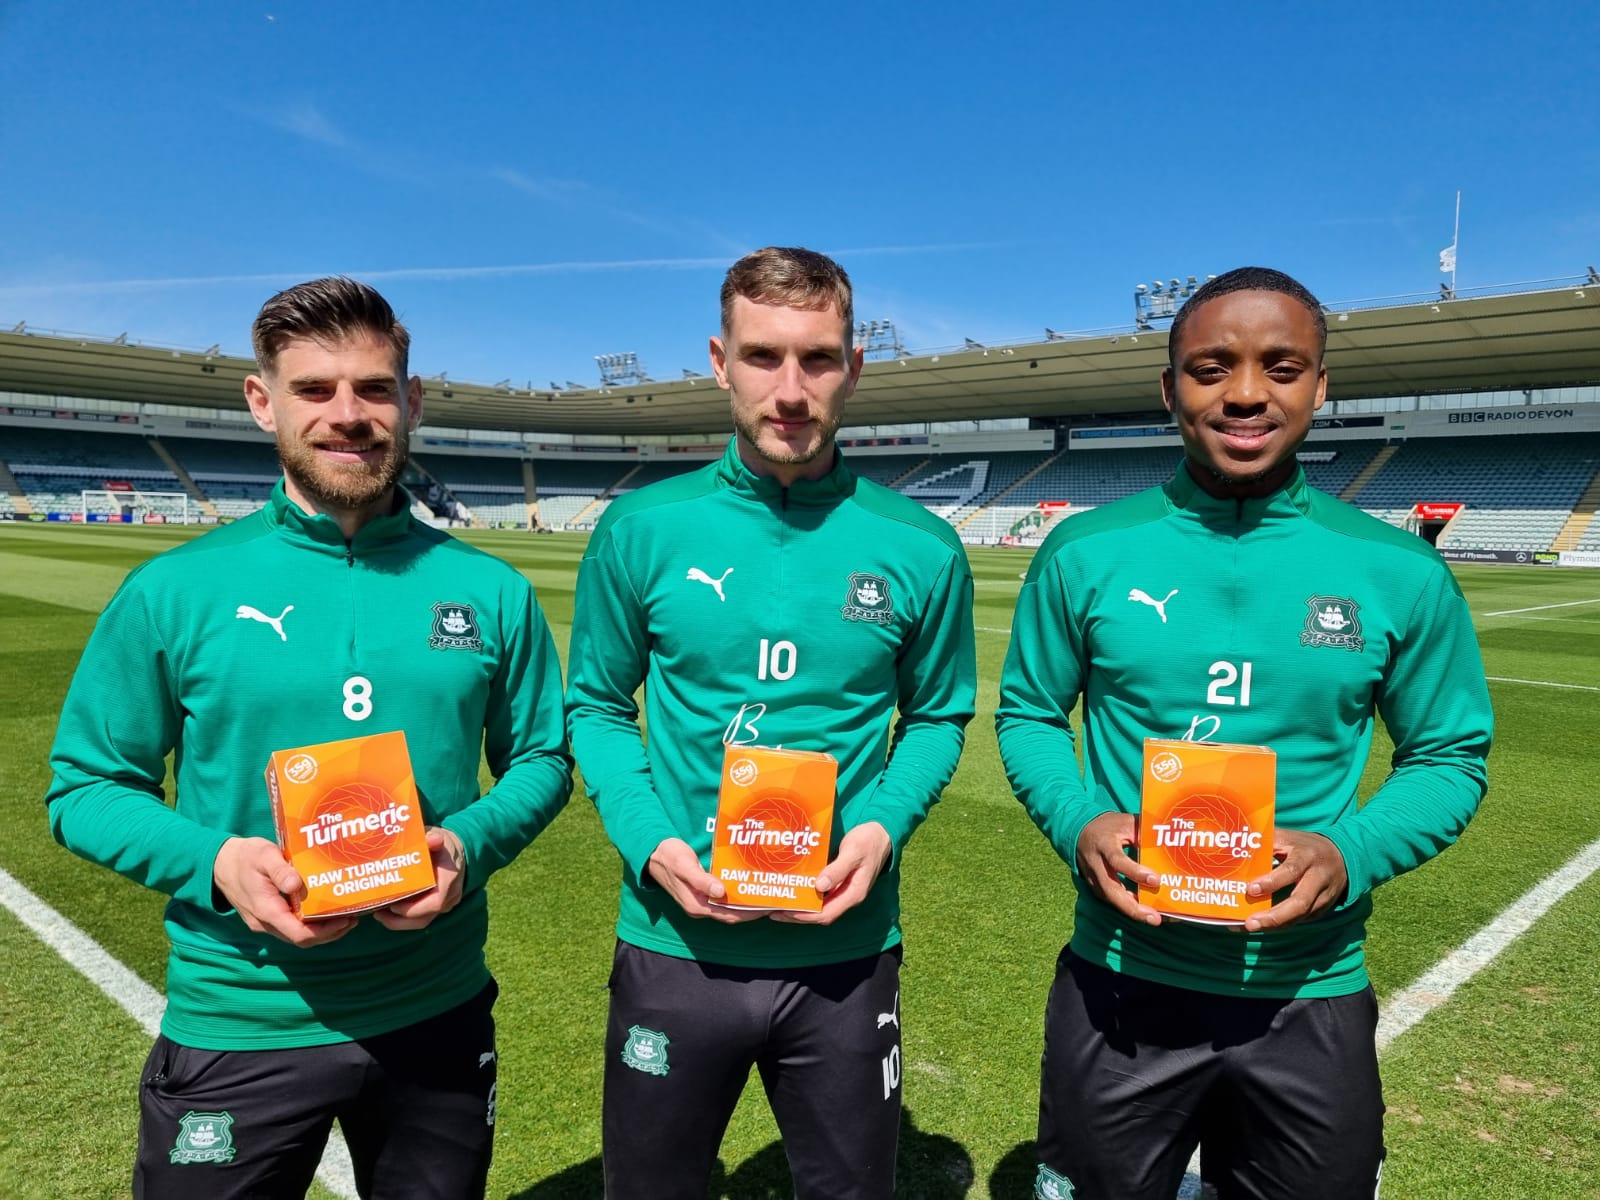 Plymouth Argyle football players with The Turmeric Co shots